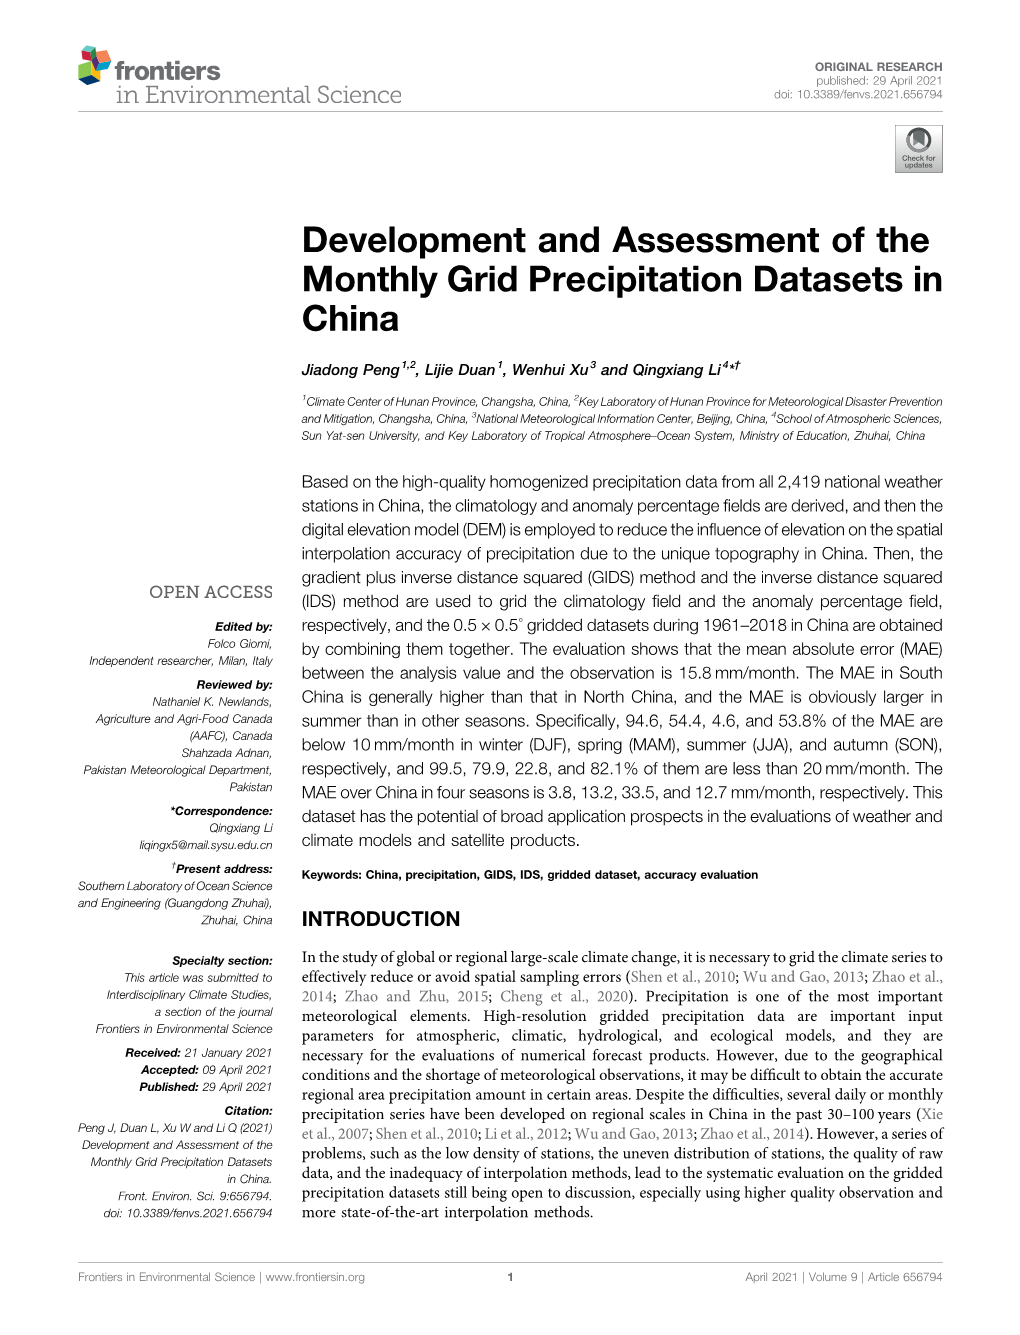 Development and Assessment of the Monthly Grid Precipitation Datasets in China